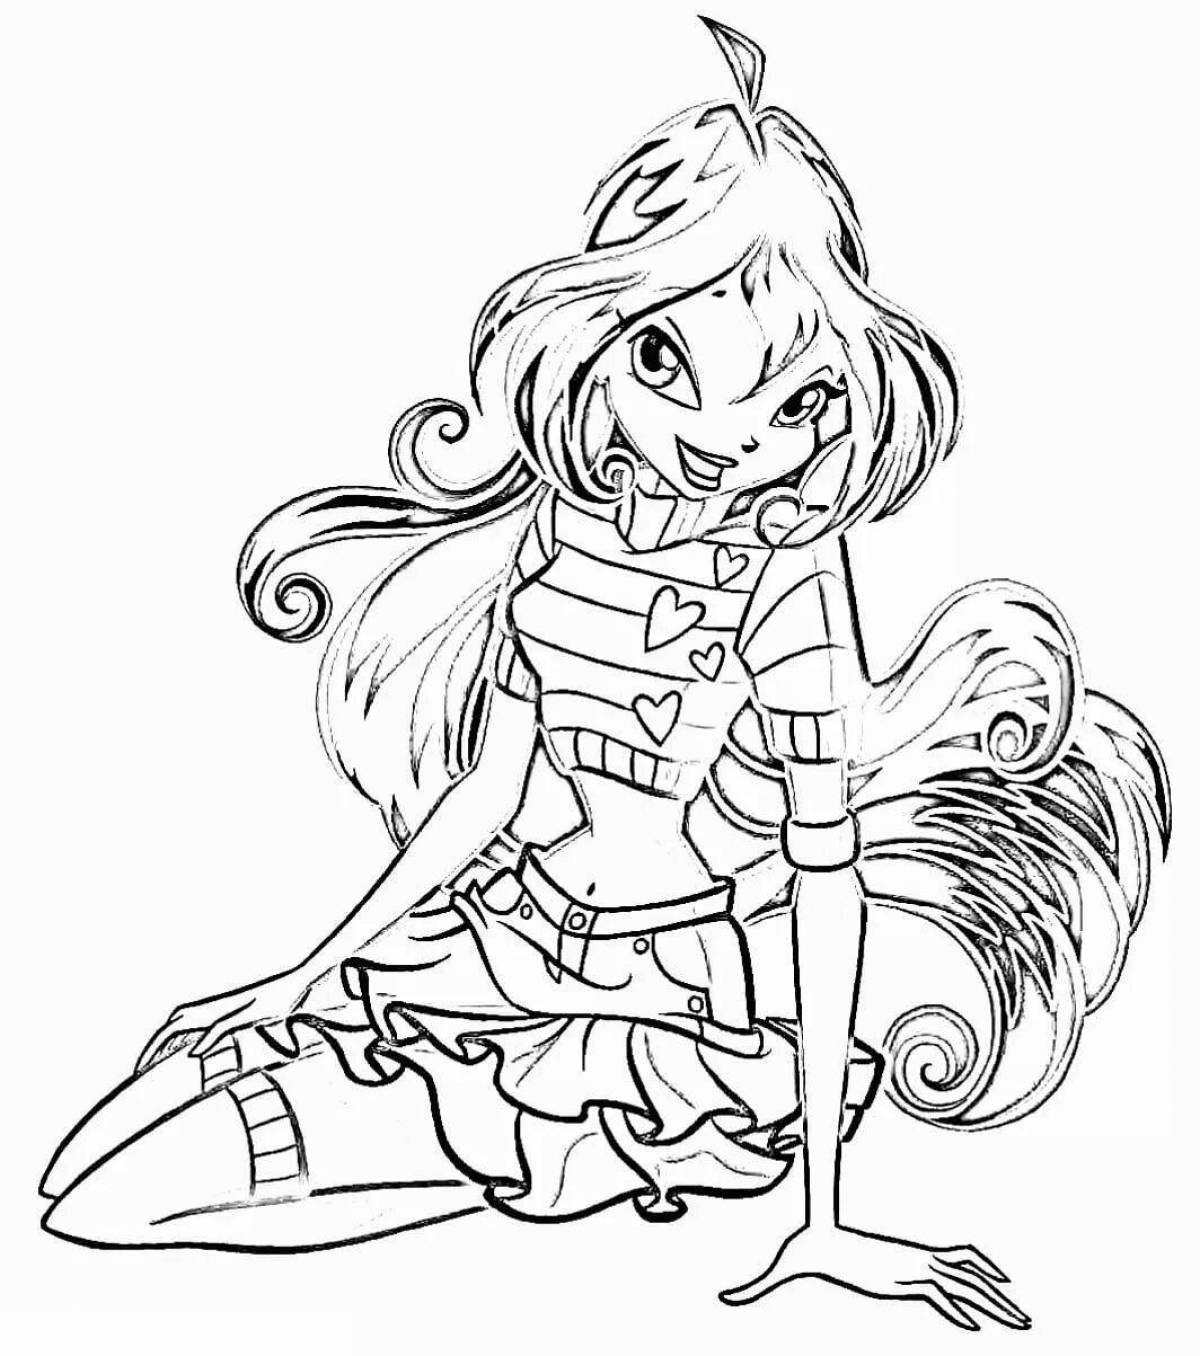 Winx bloom fairy coloring pages